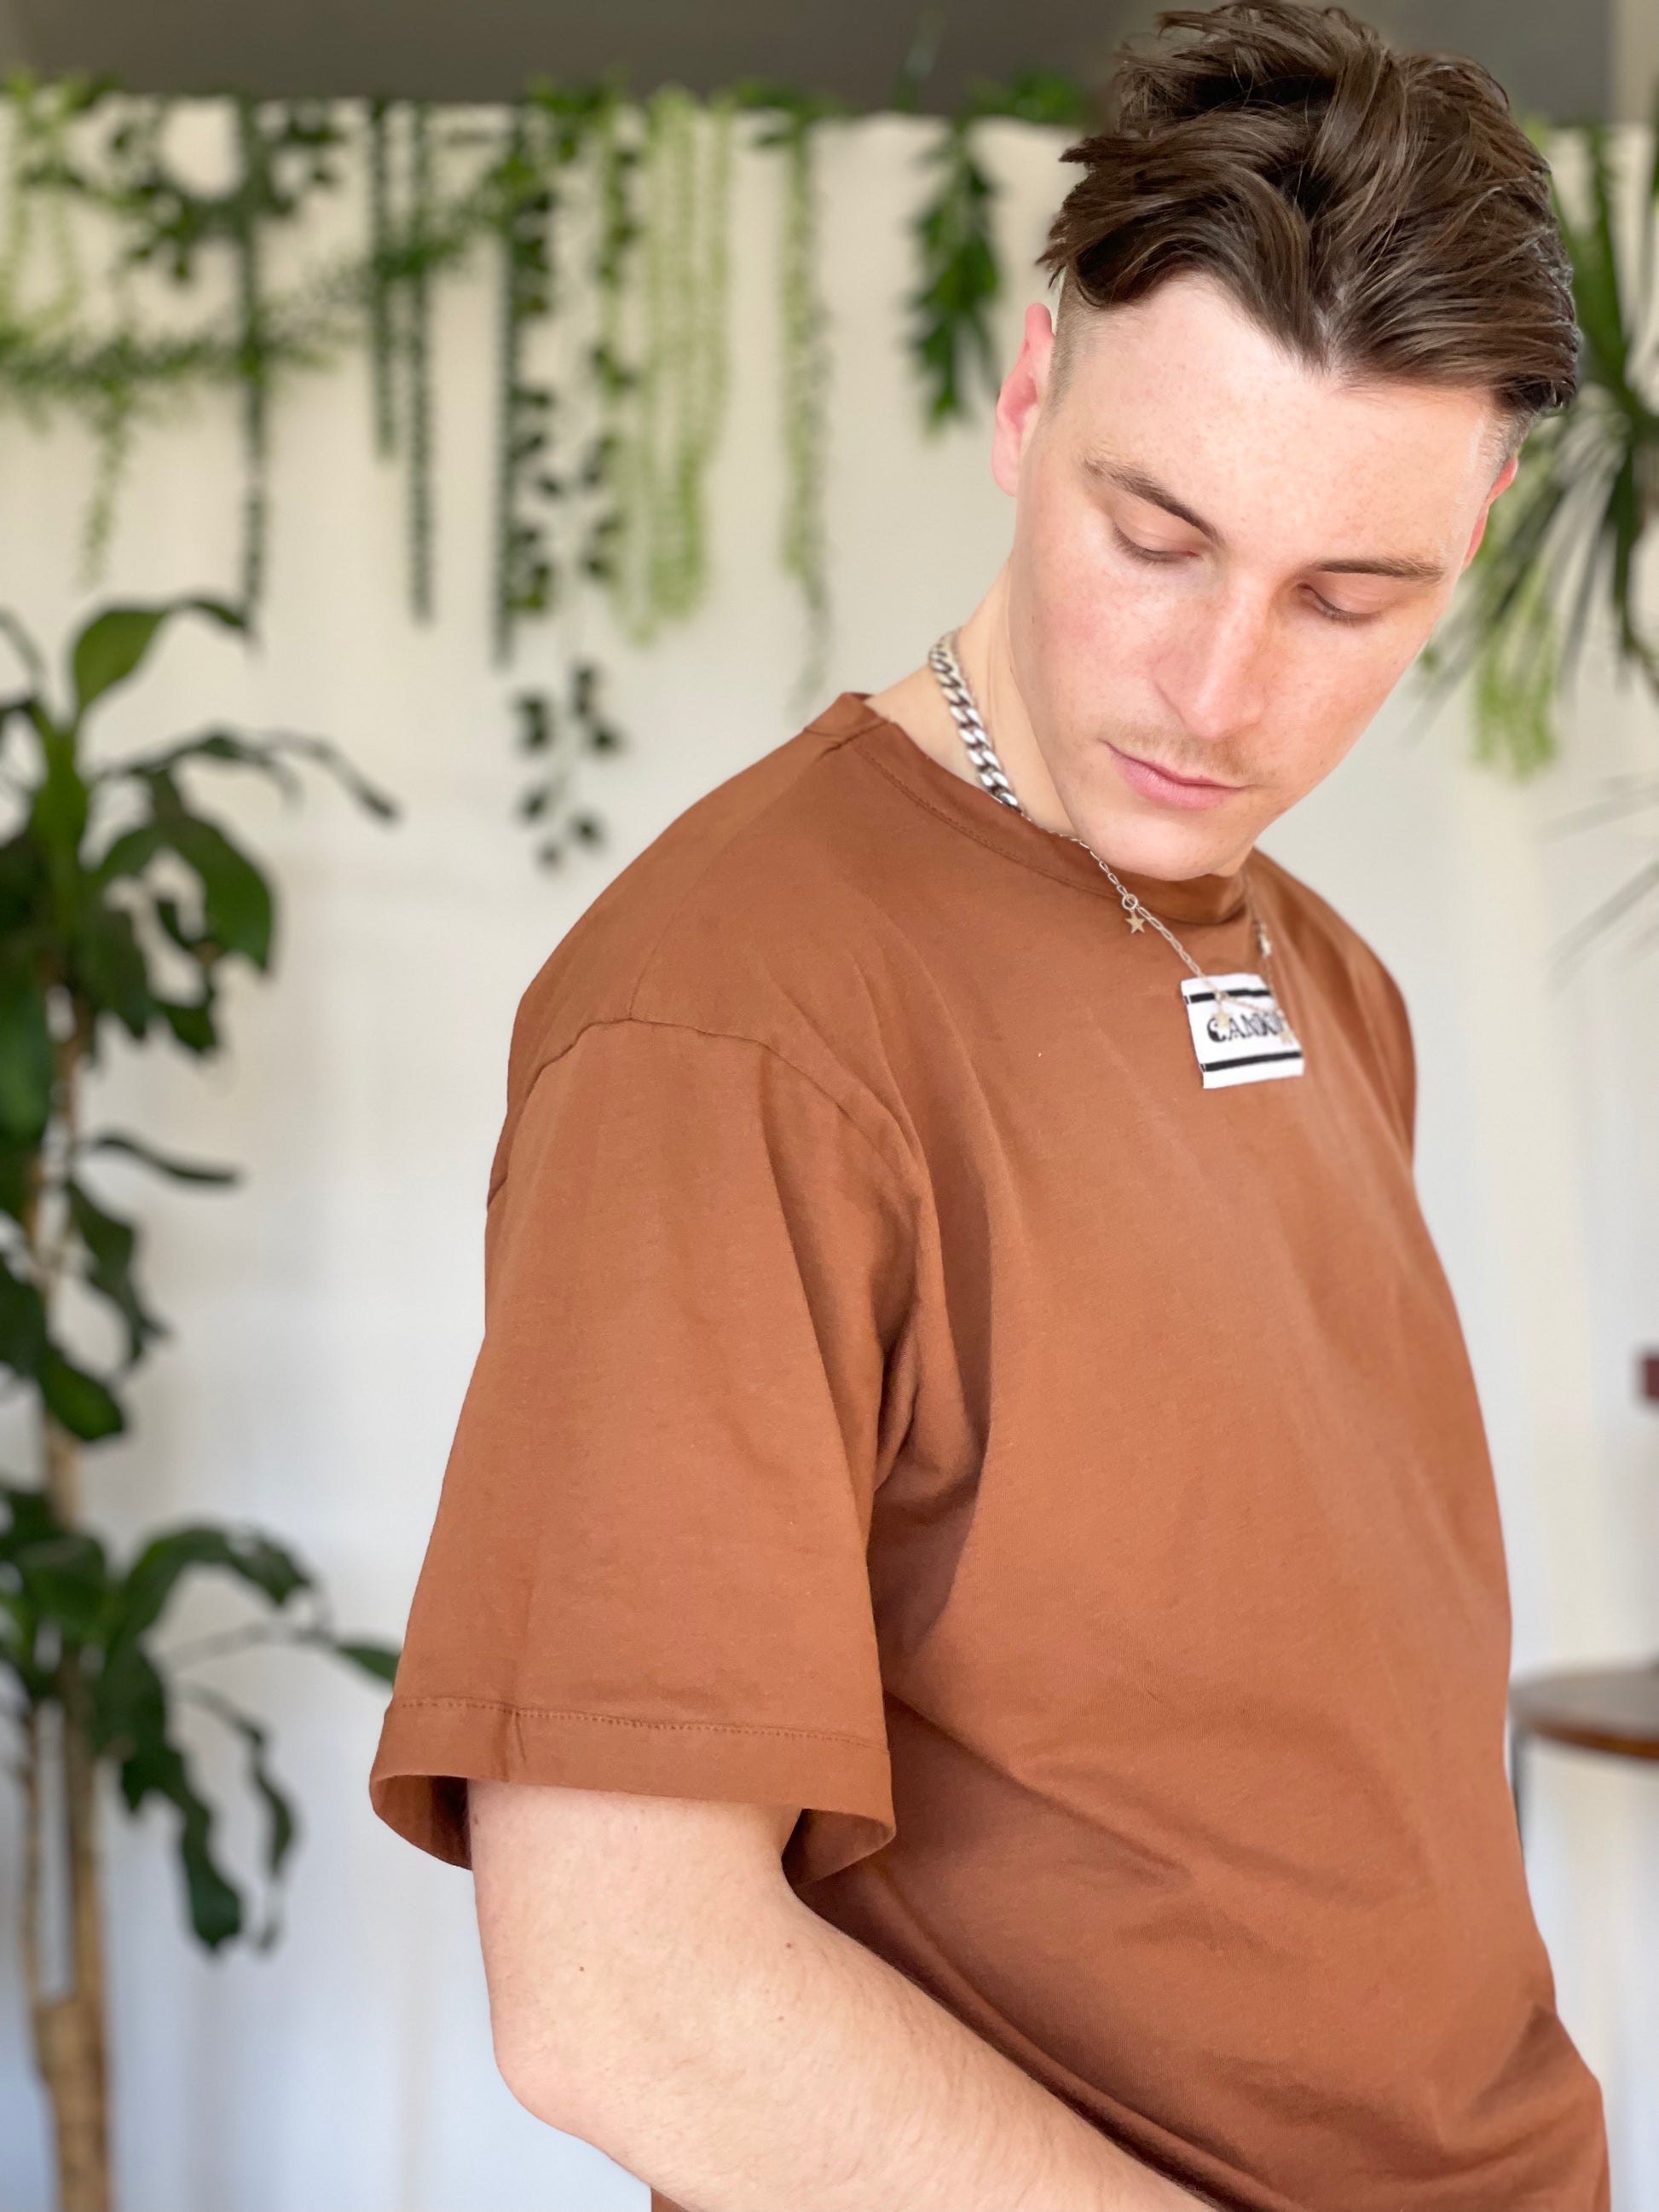 Models wears light brown t-shirt with Candor label. Model stands side on looking down against a white backdrop with plants.